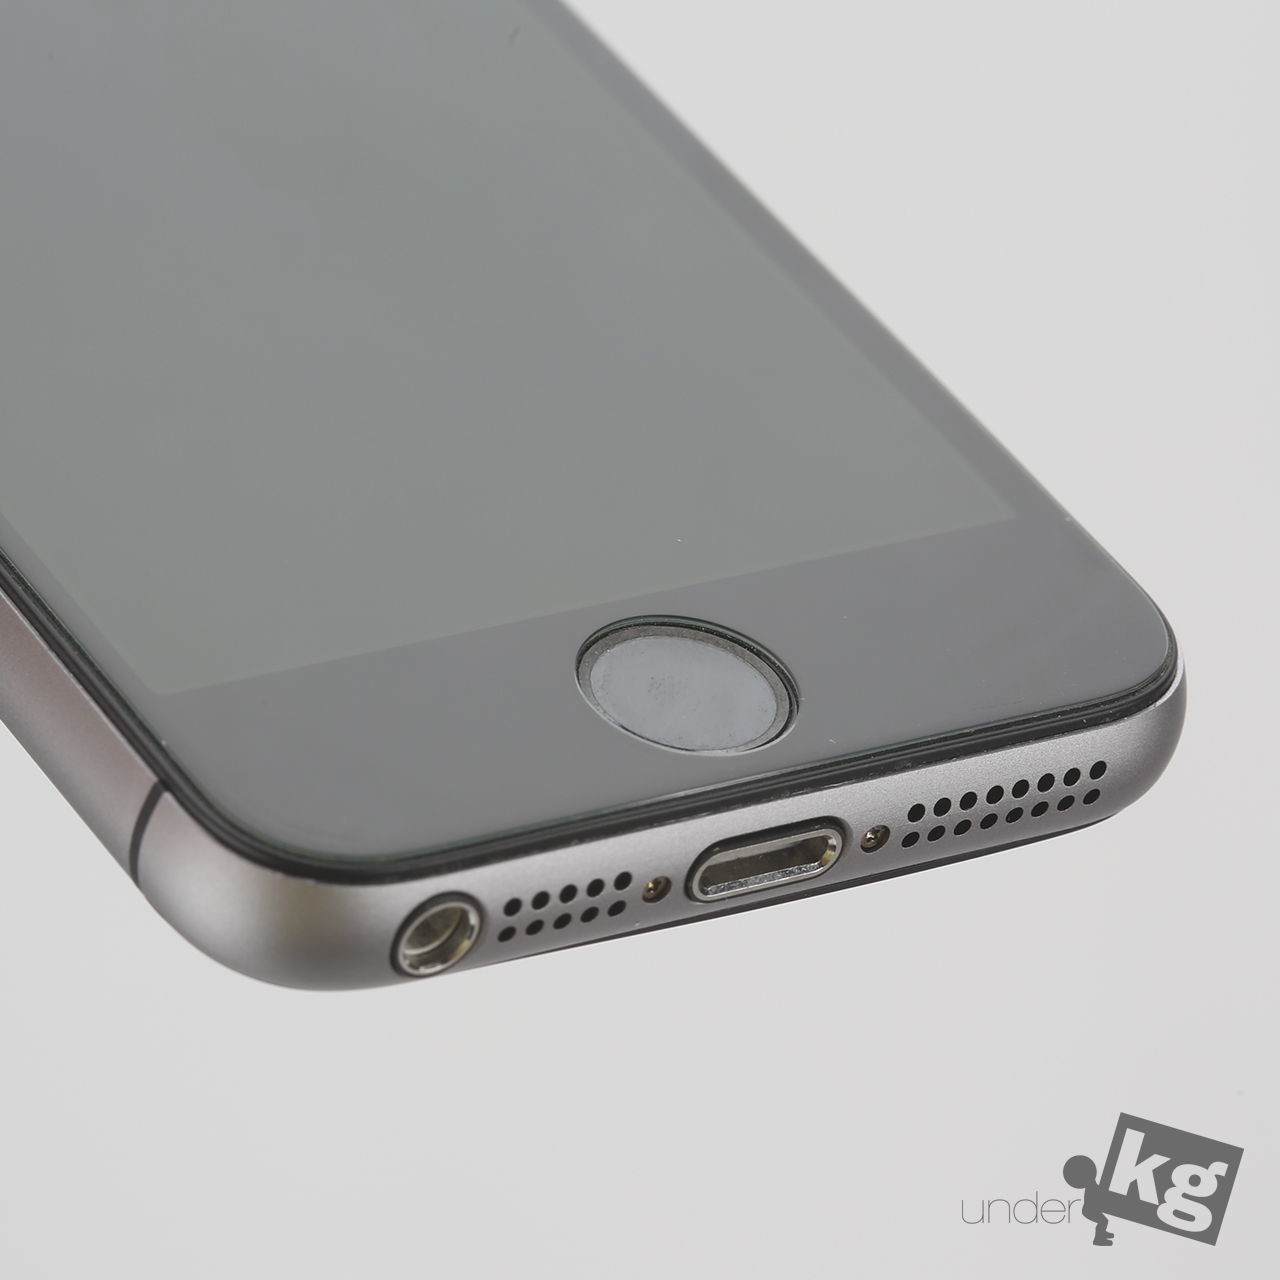 iphone5s-to-iphone6-housing-change-pic6.jpg